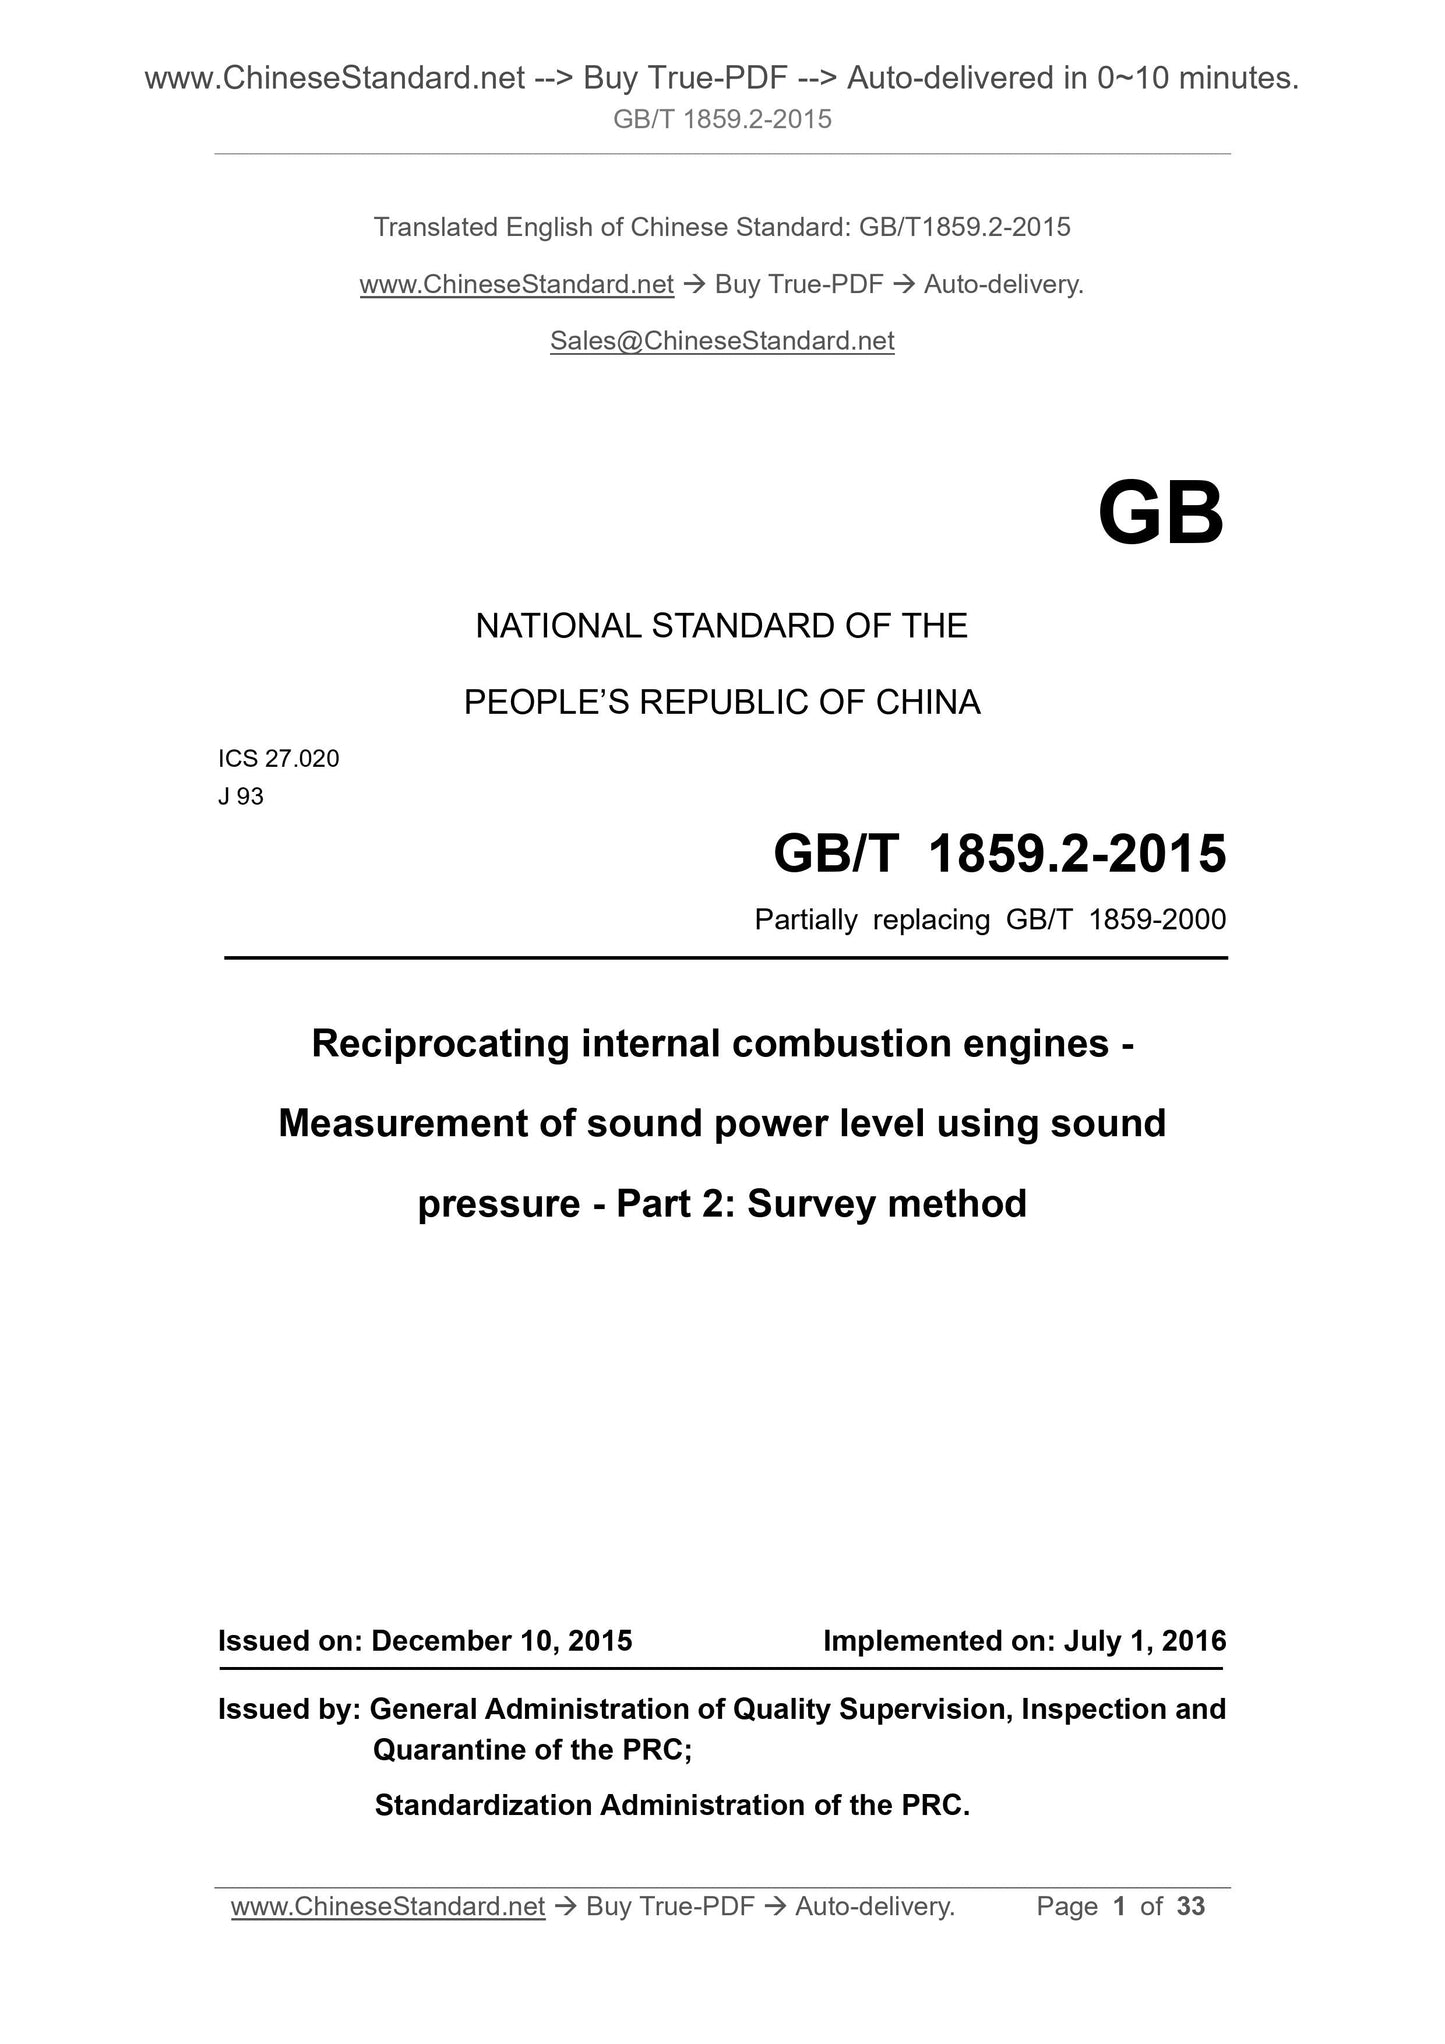 GB/T 1859.2-2015 Page 1